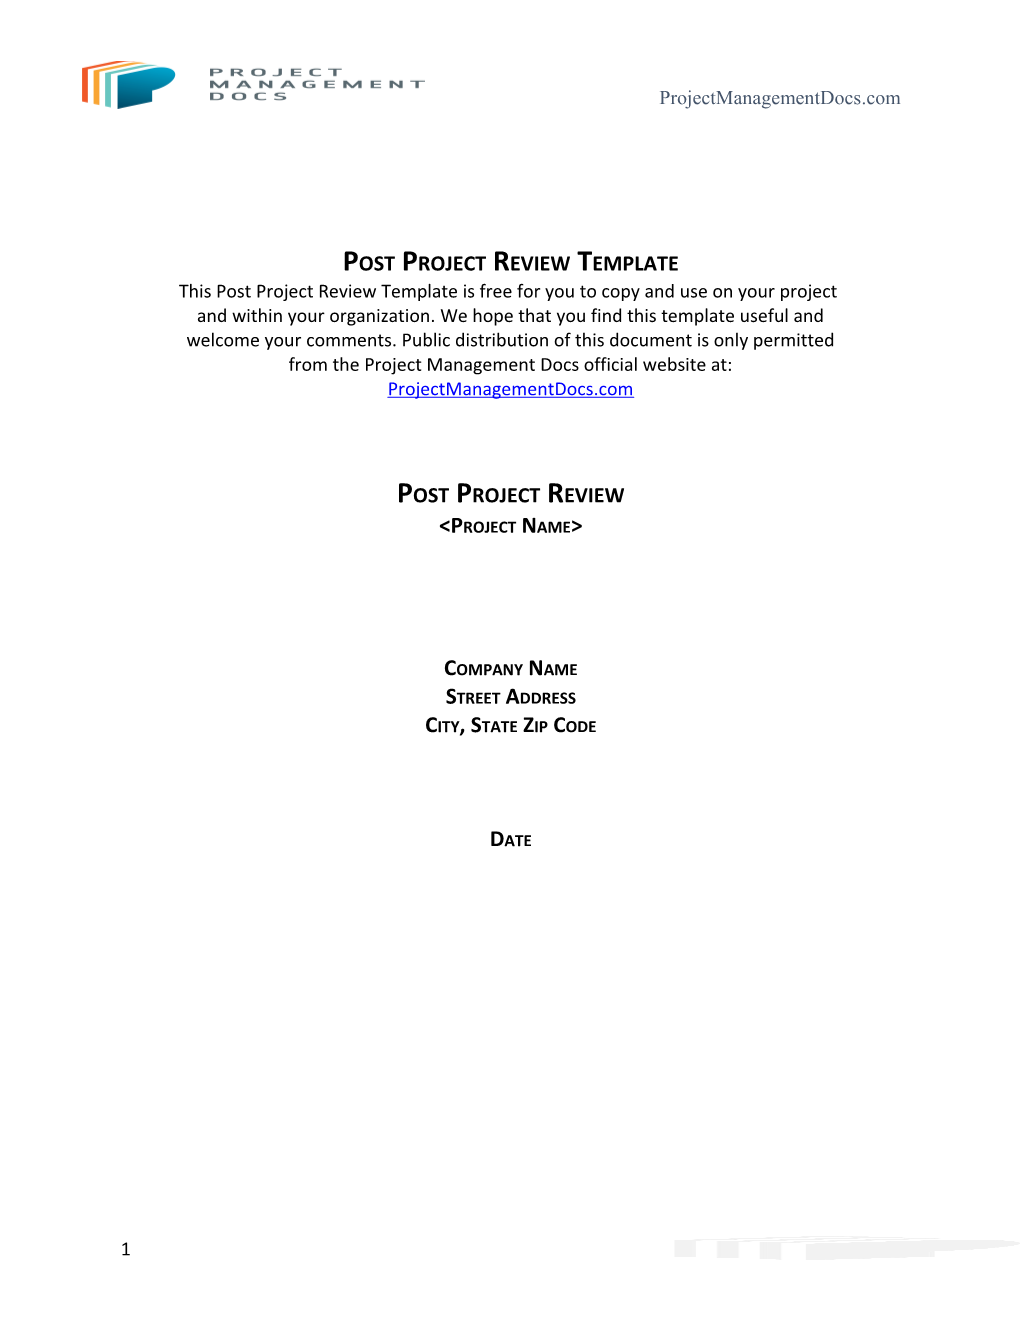 Post Project Review Template